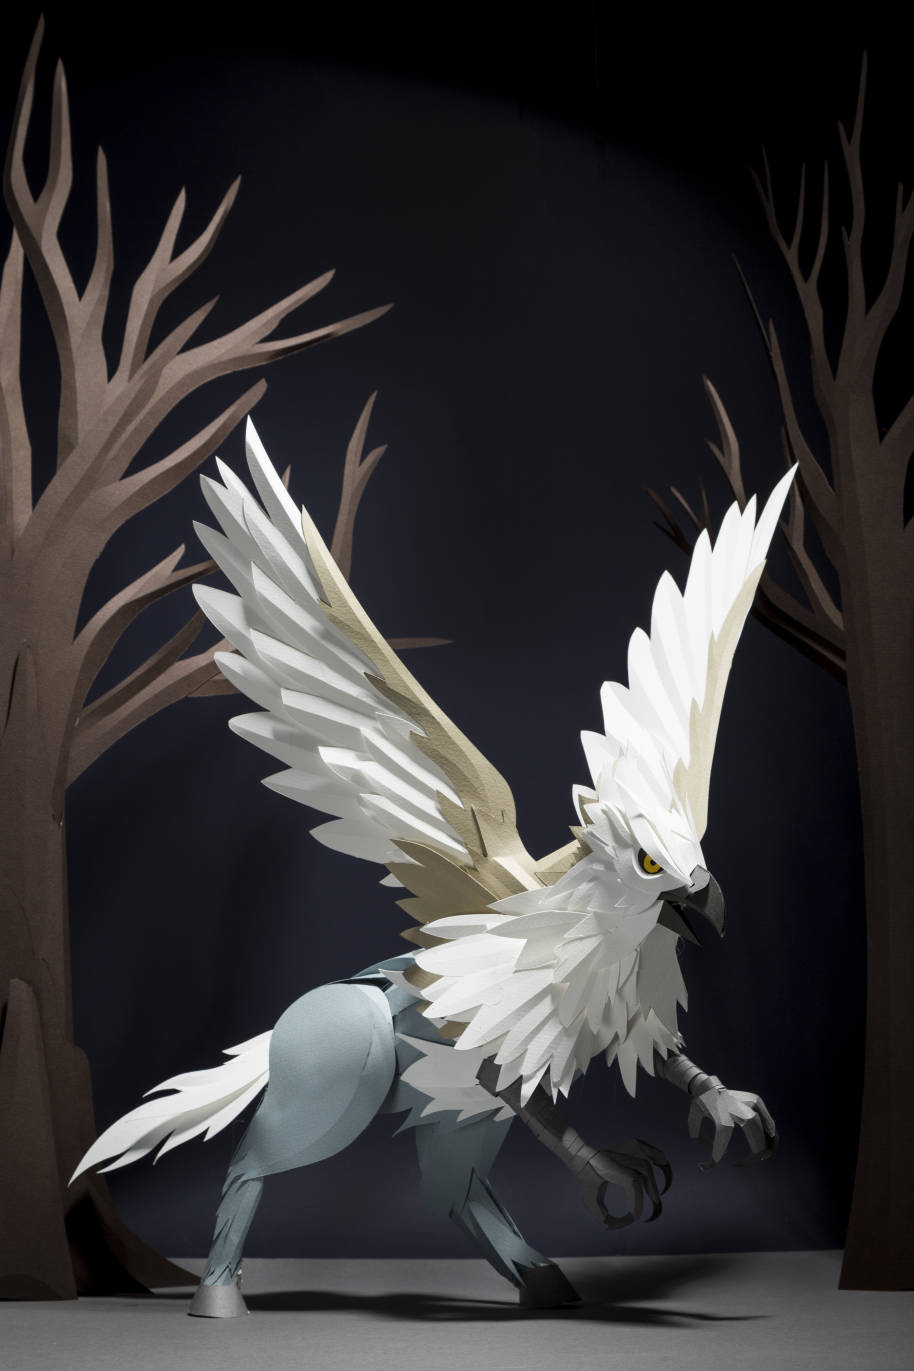 Photograph of a paper model of a Hippogriff, by artist Andy Singleton